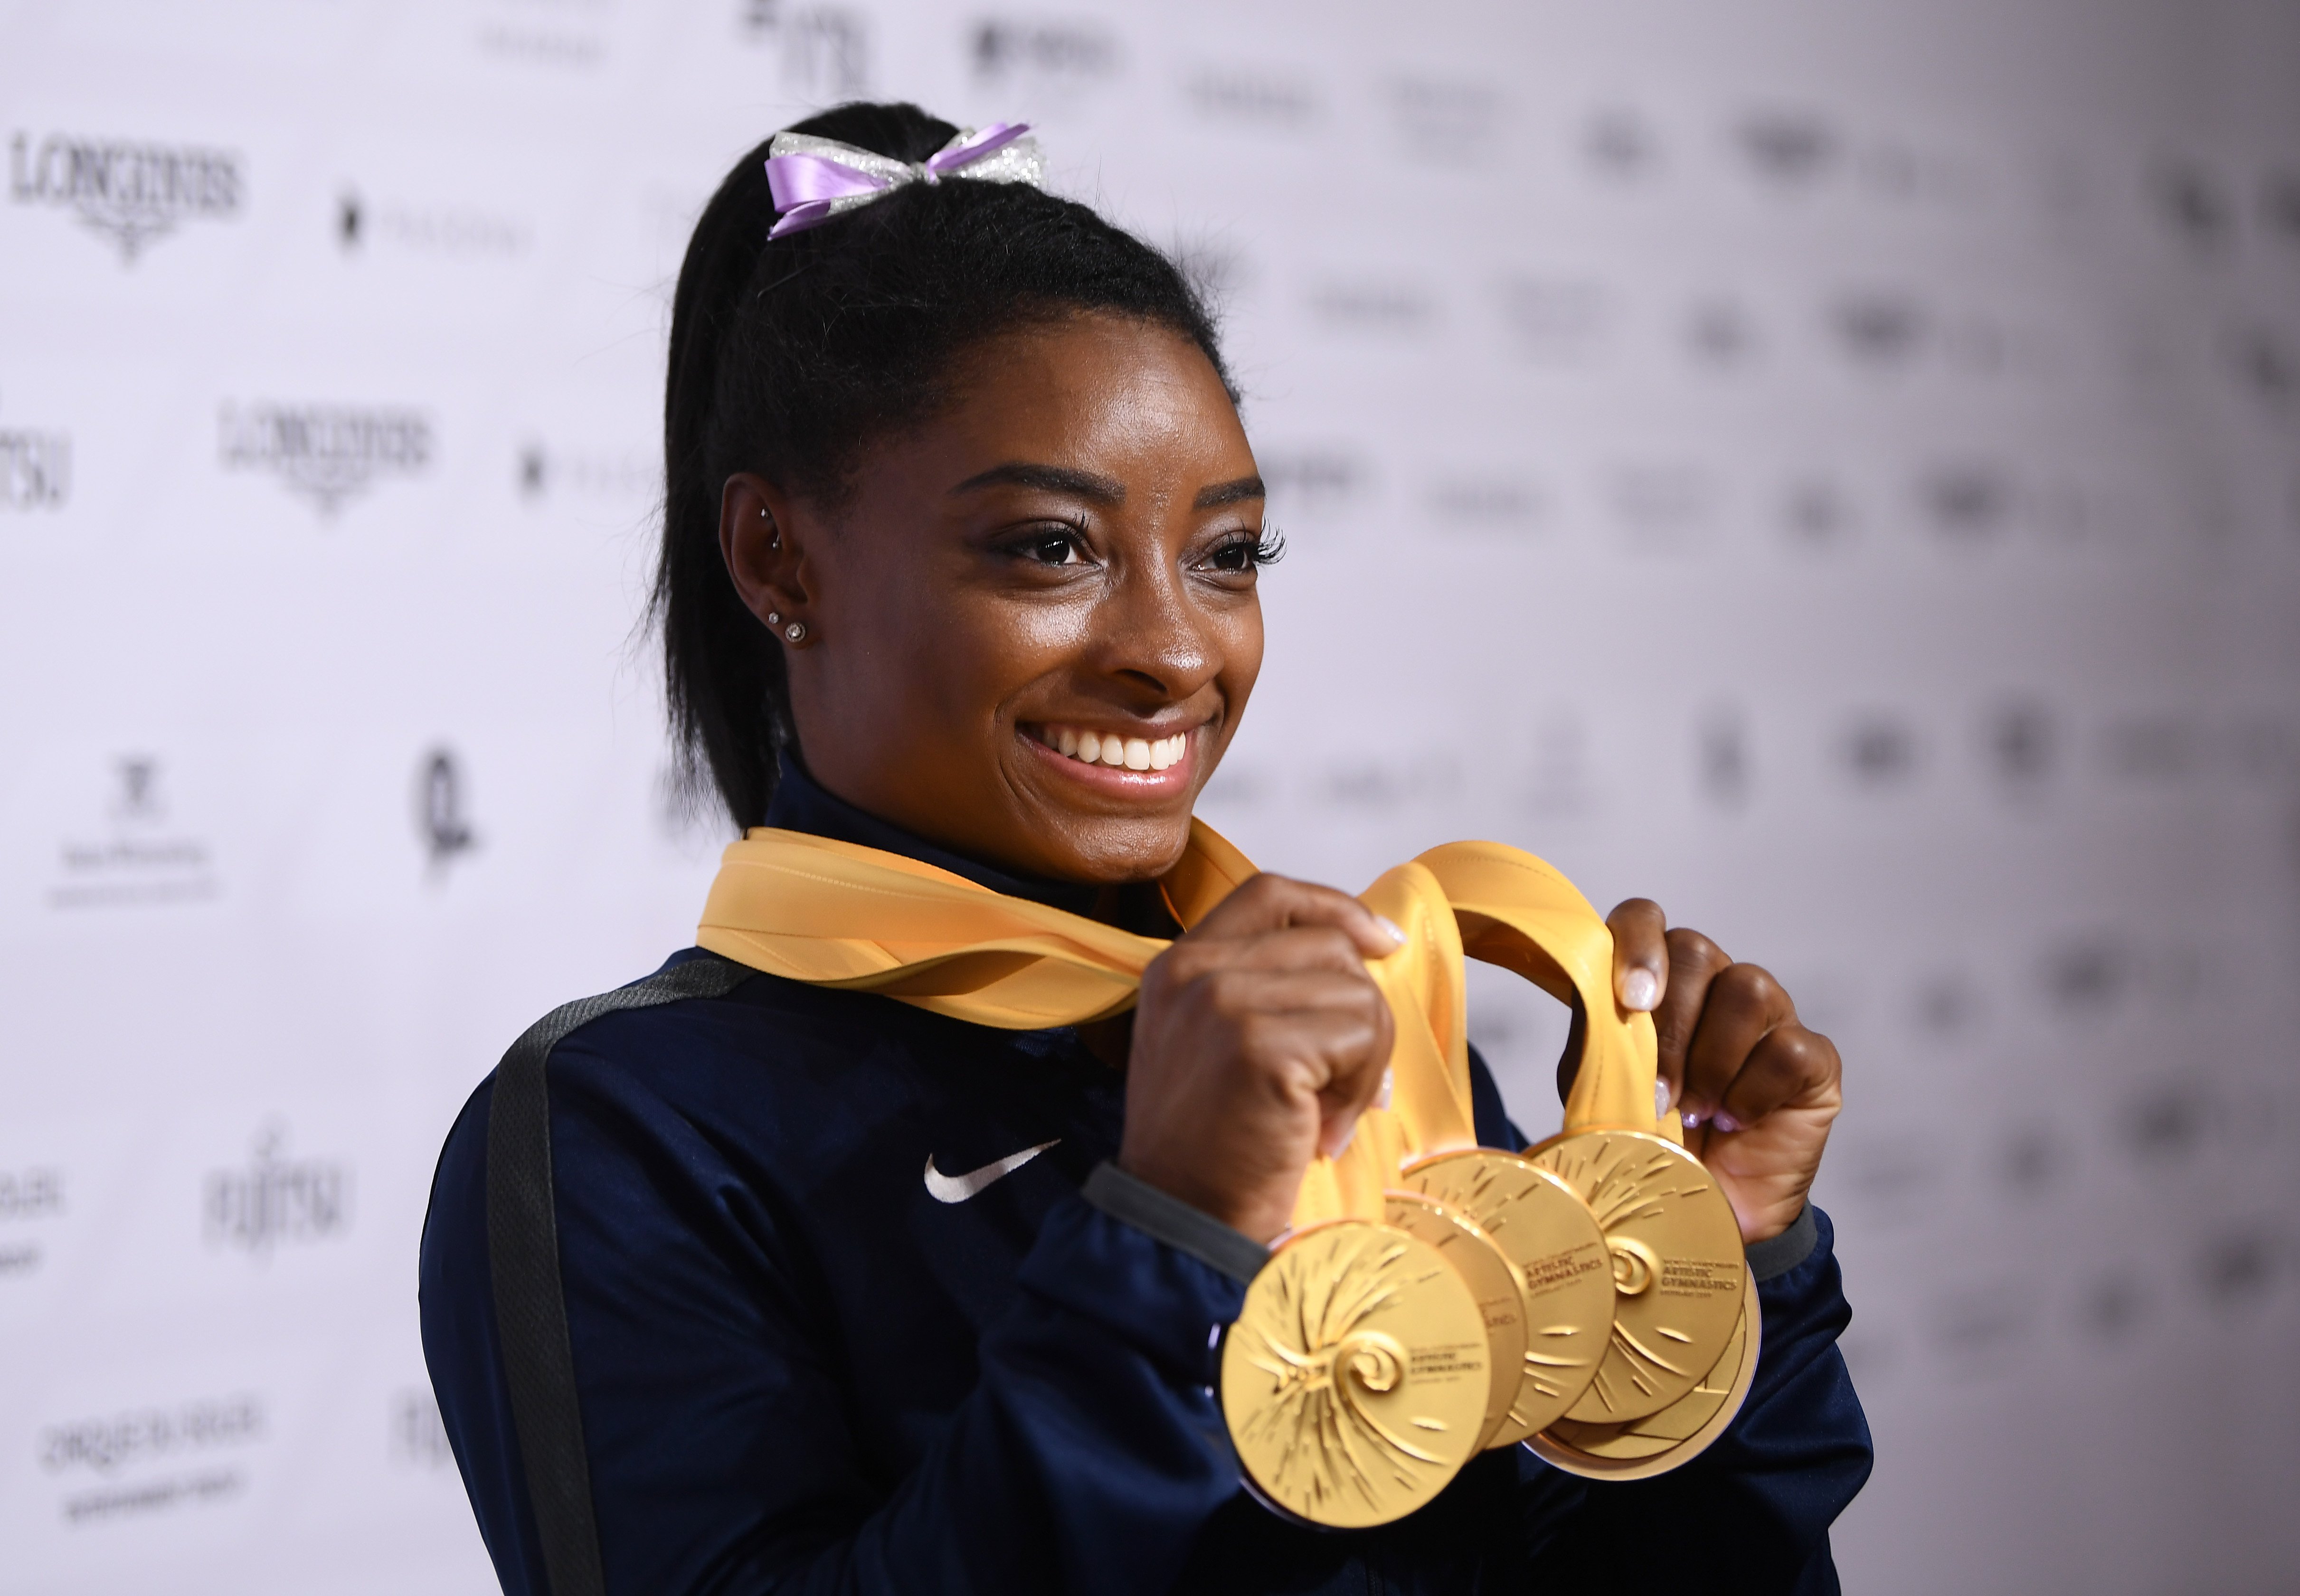 Simone Biles poses with her medals at the the FIG Artistic Gymnastics World Championships on October 13, 2019 in Stuttgart, Germany. | Source: Getty Images